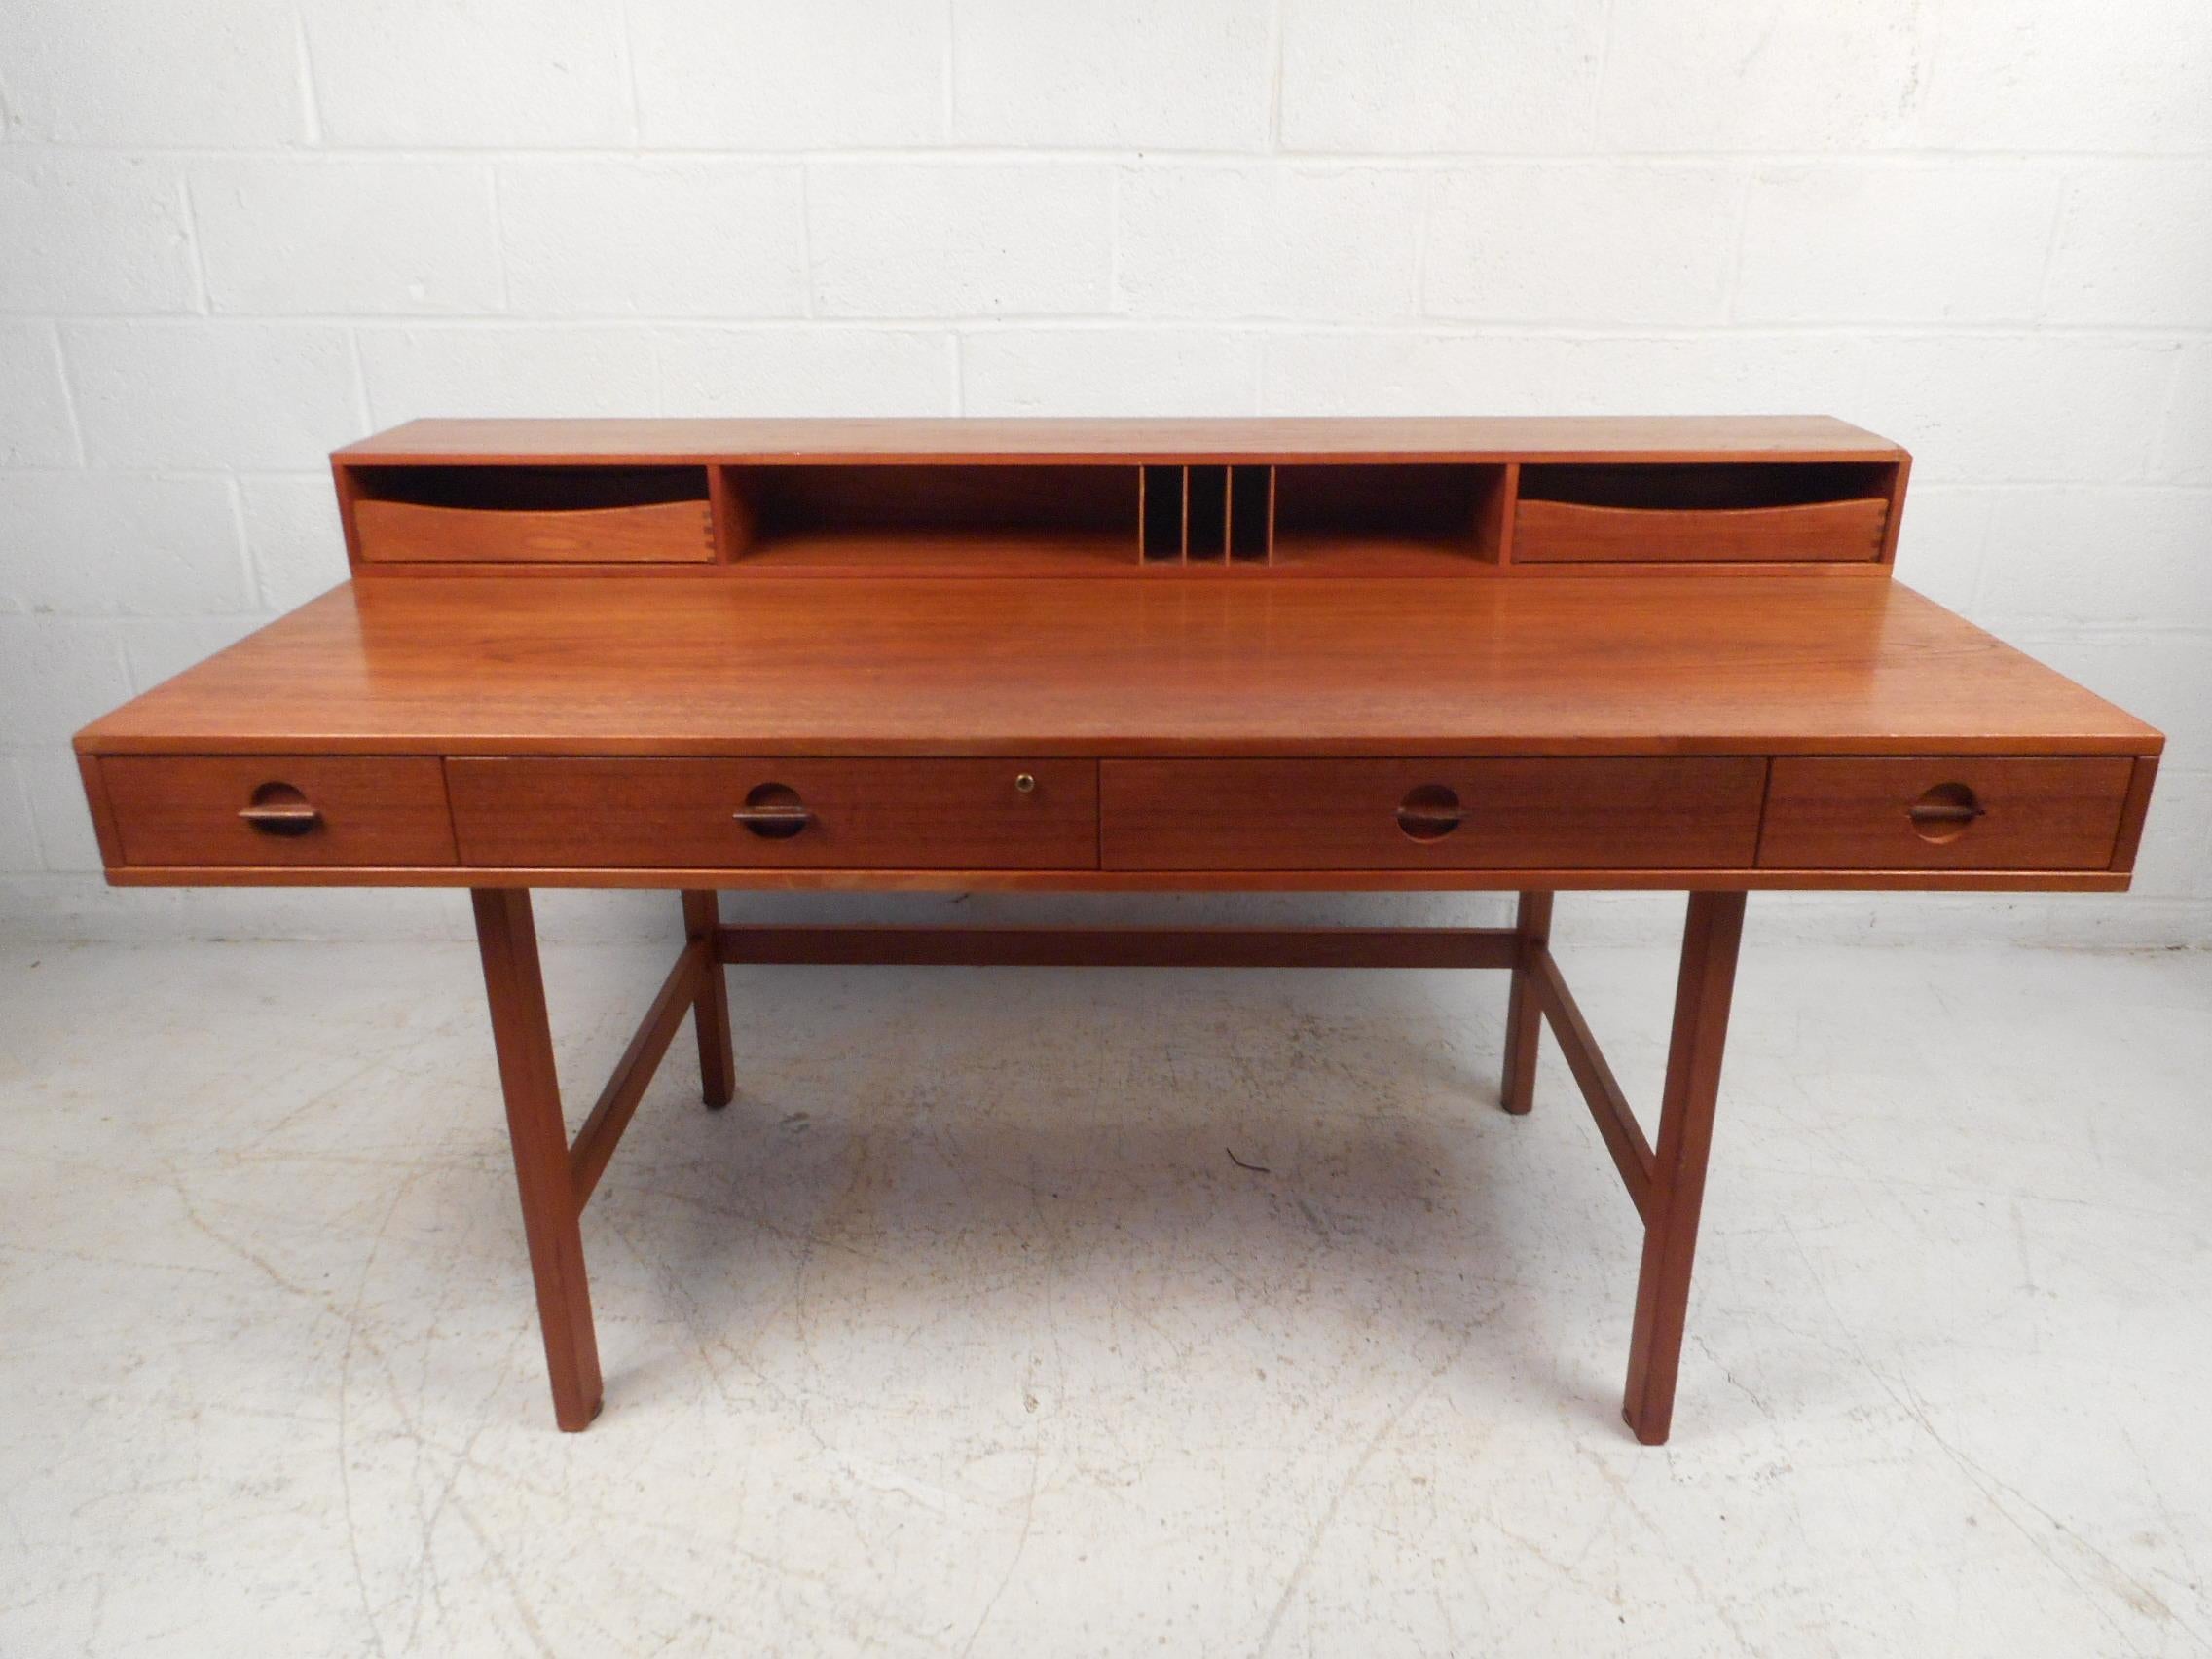 A versatile midcentury desk with plenty of room for storage and a flip top with storage trays and cubbies. This stunning Danish modern desk boasts a rich teak finish, four large drawers, and stretchers along the base for added sturdiness. When the